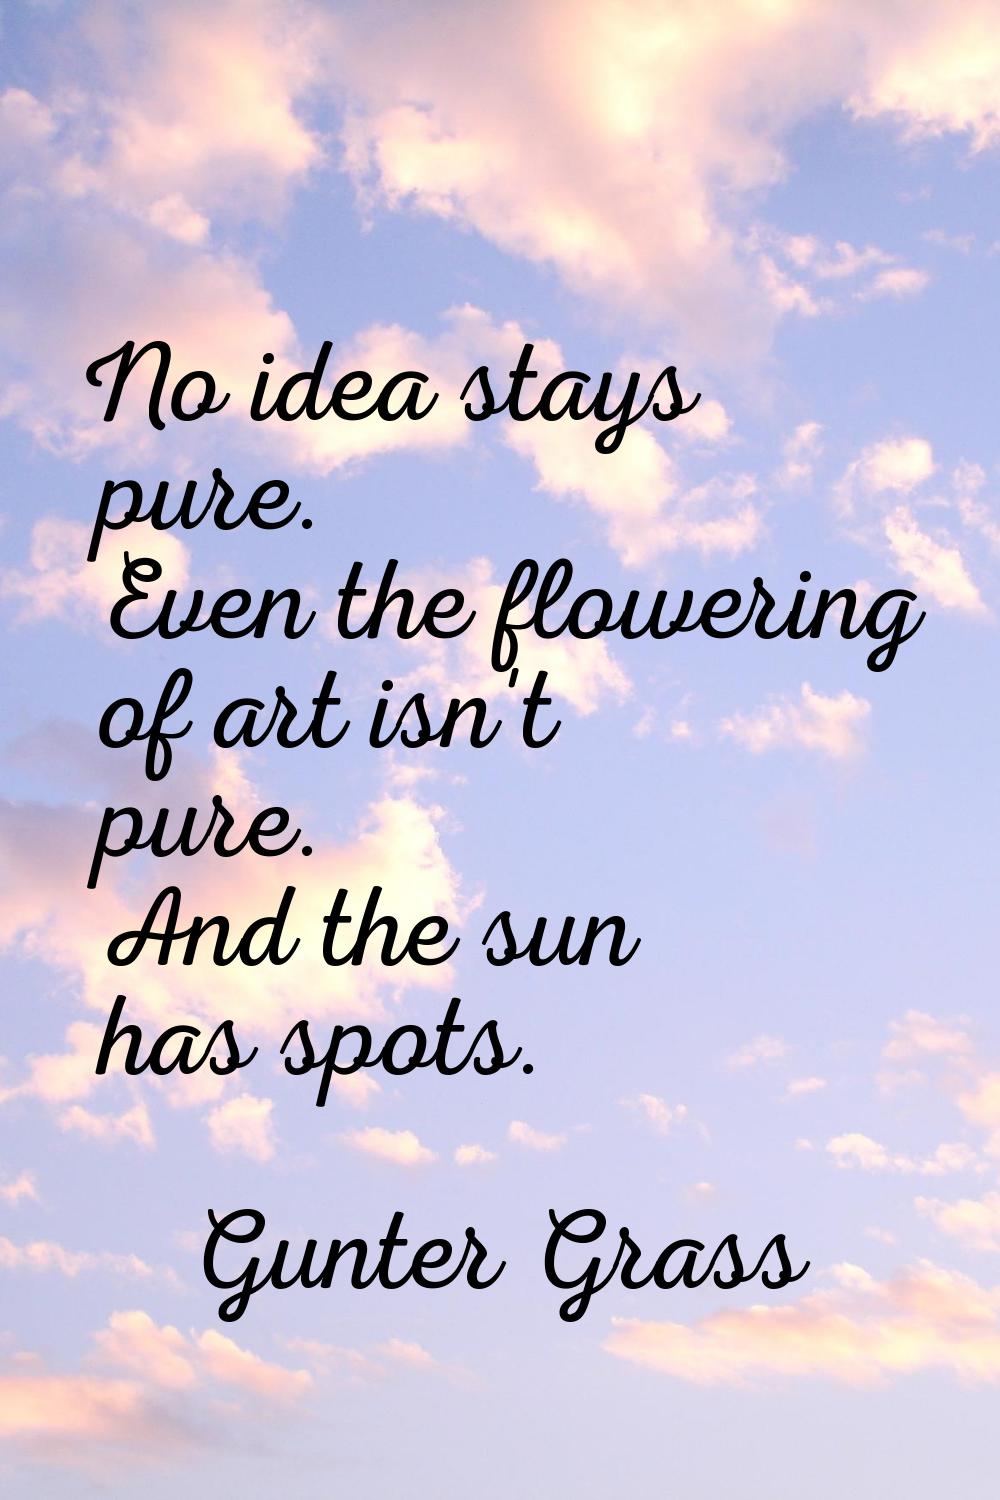 No idea stays pure. Even the flowering of art isn't pure. And the sun has spots.